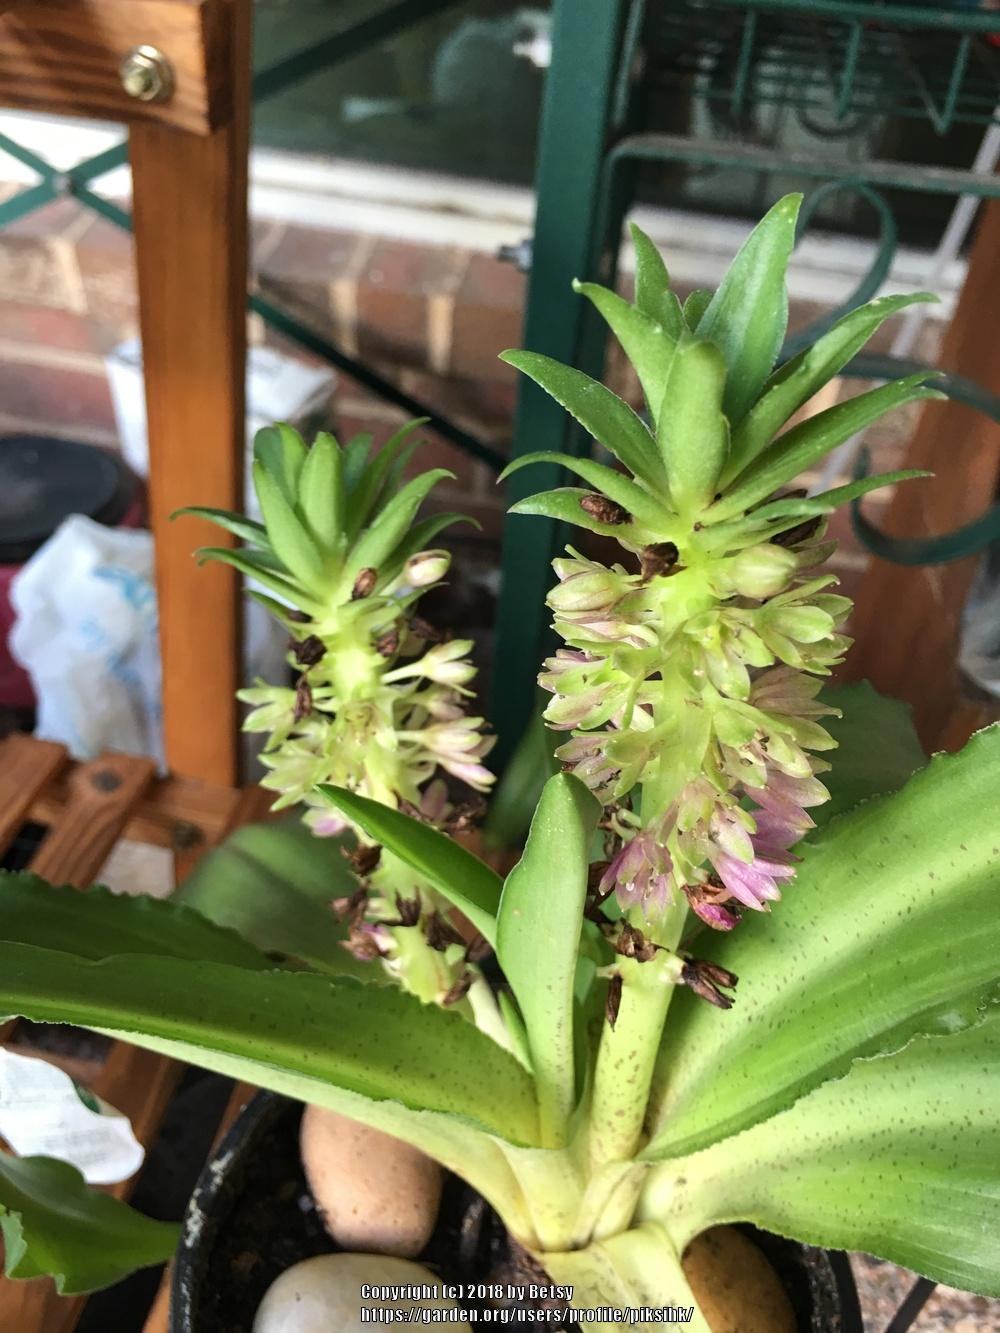 Photo of Pineapple Lily (Eucomis) uploaded by piksihk